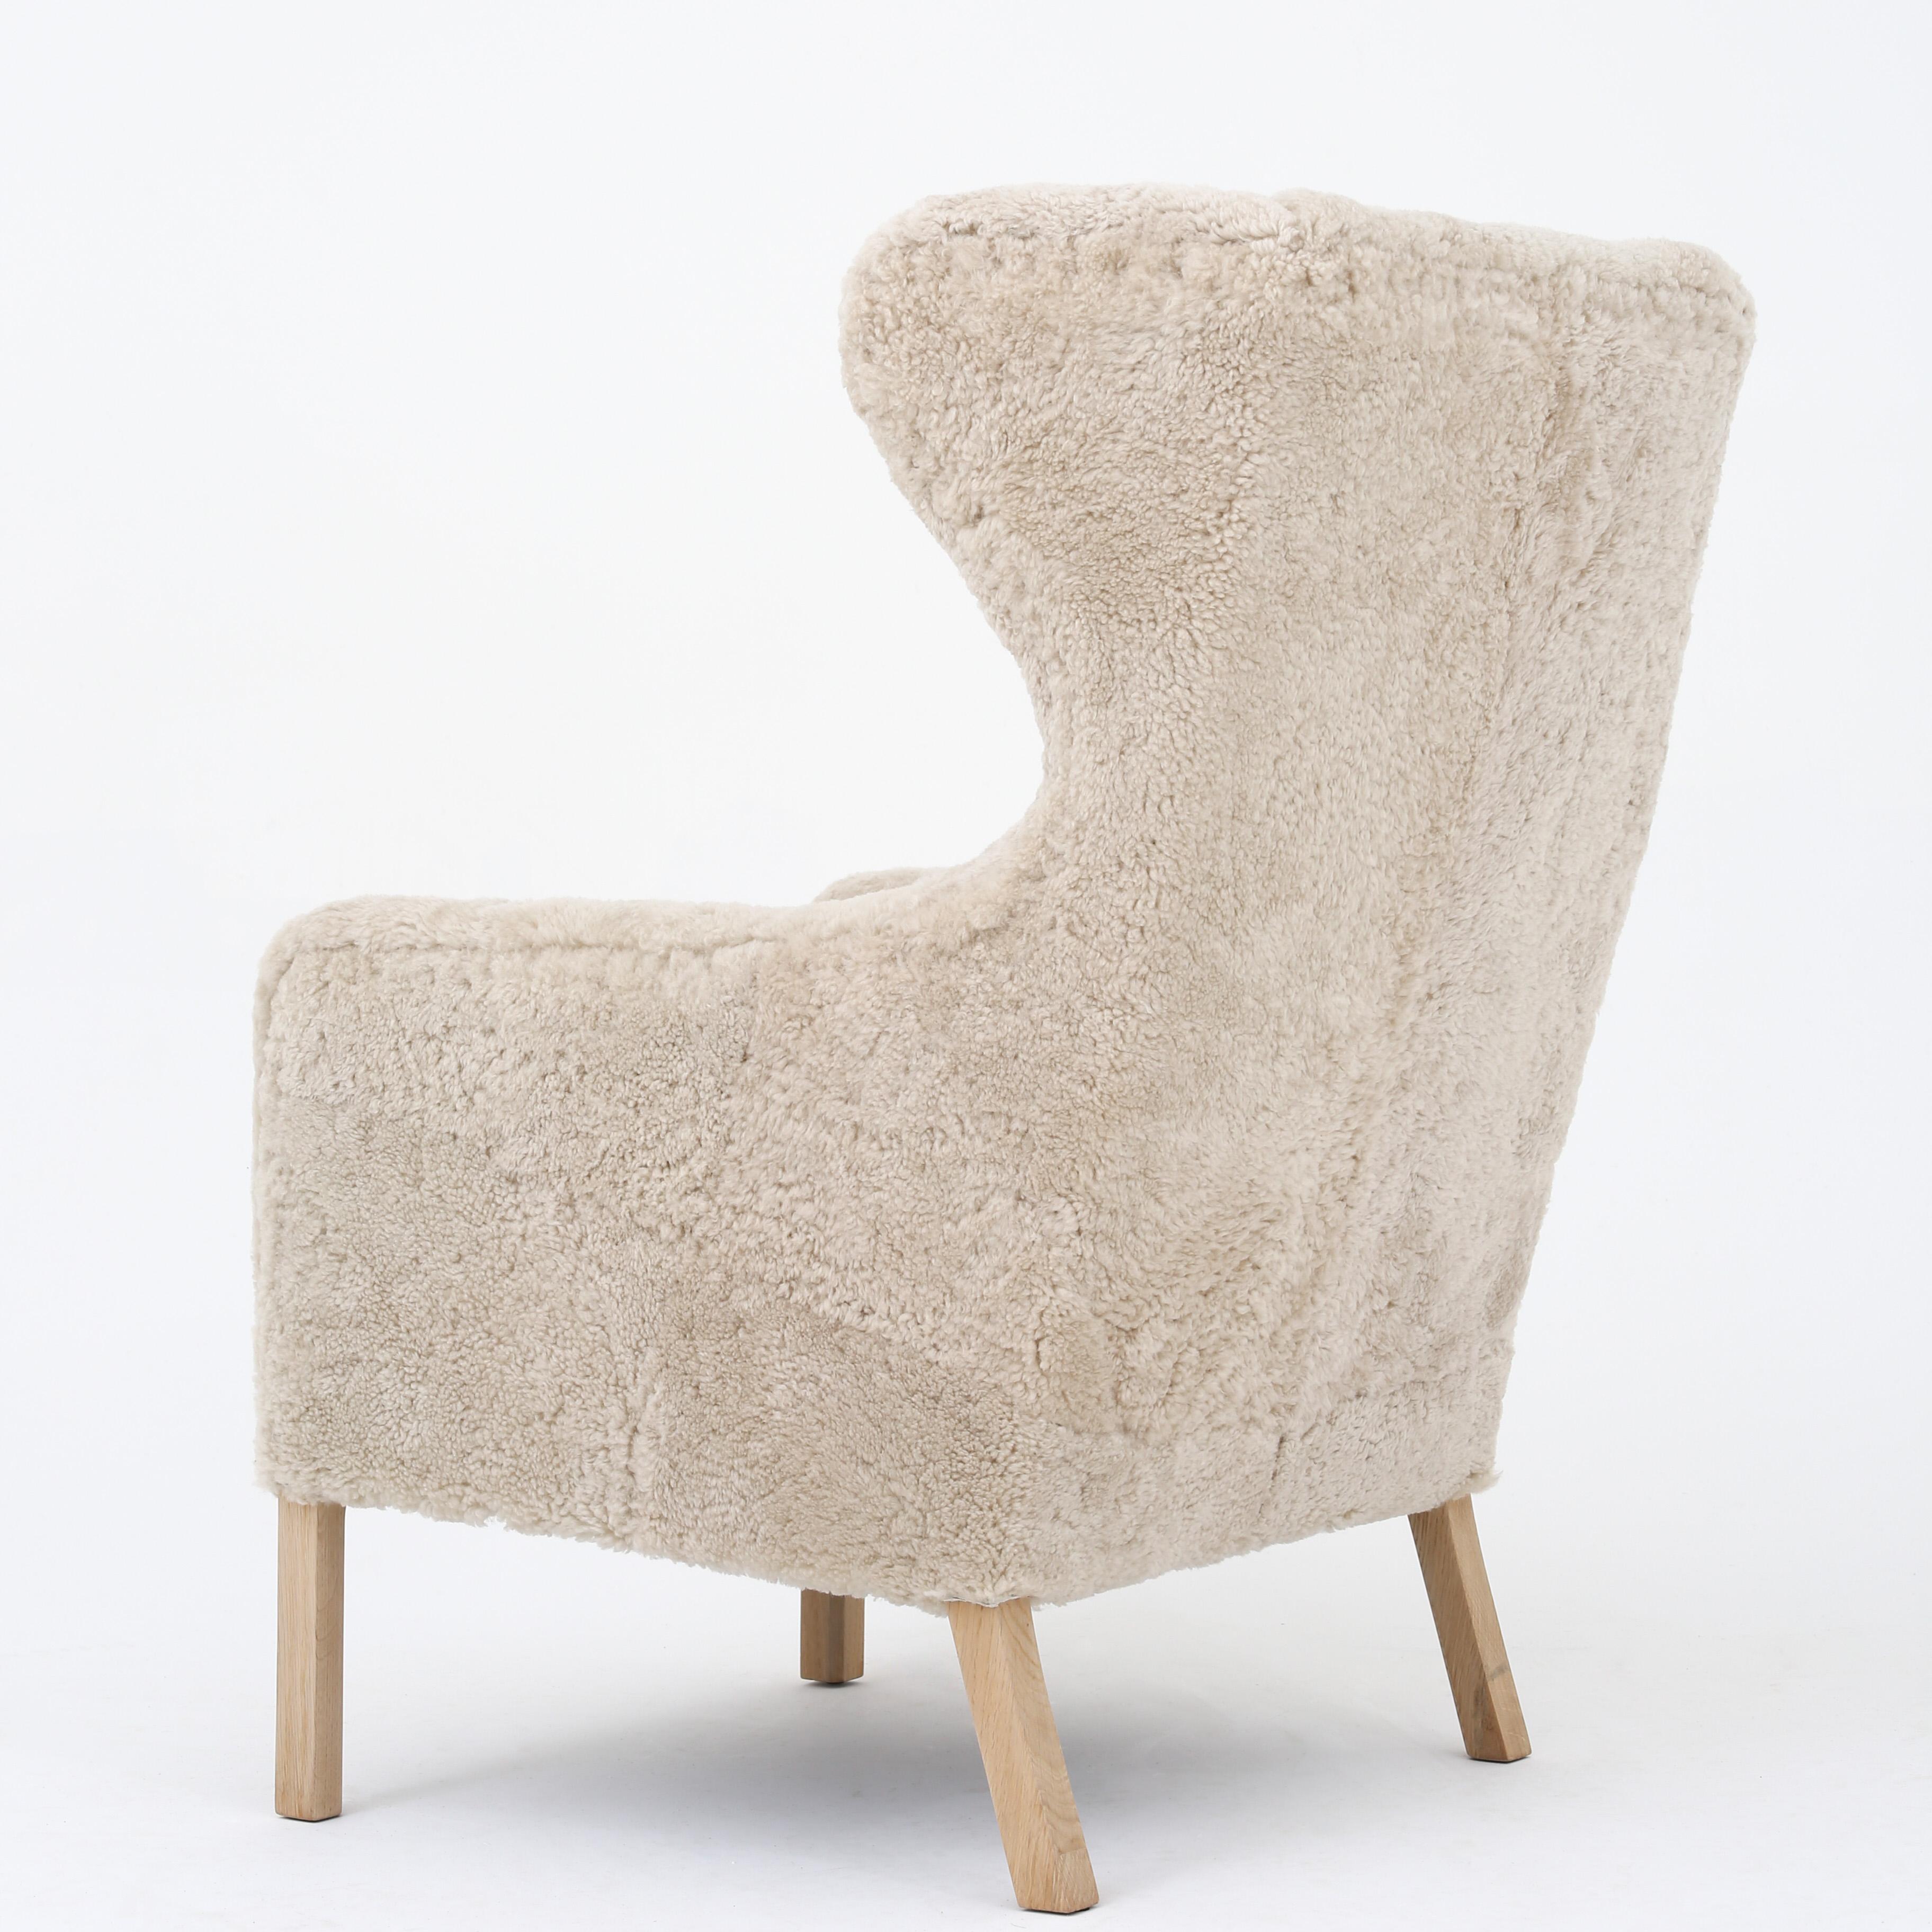 Danish Ejnar Larsen Wing-Back Chair in New Lambswool with Beech Legs with Stool